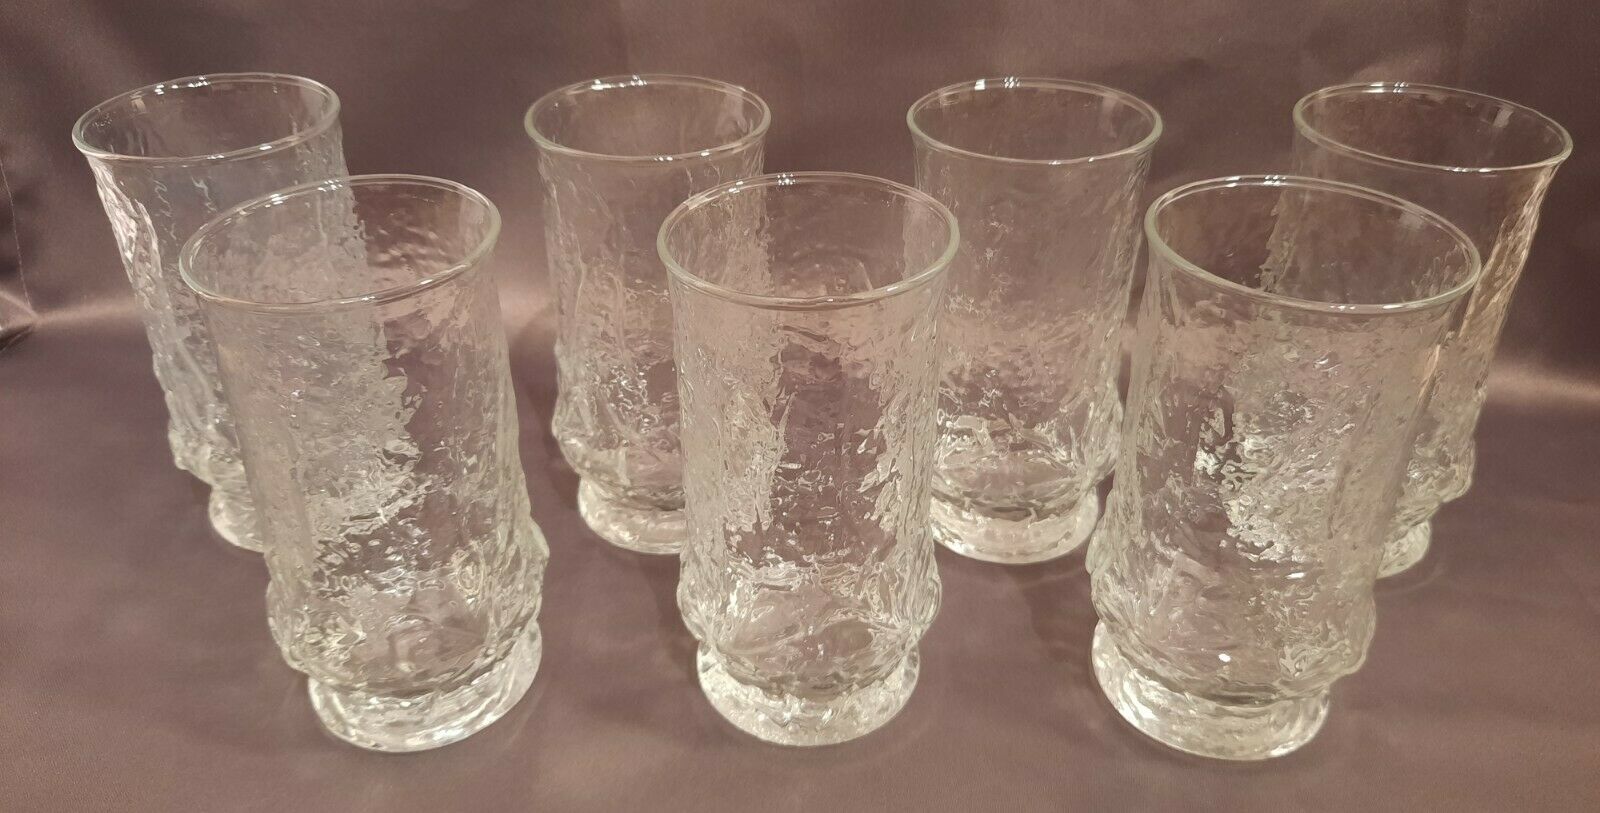 Vintage Anchor Hocking Clear Rain Flower Tumblers - Set of 7